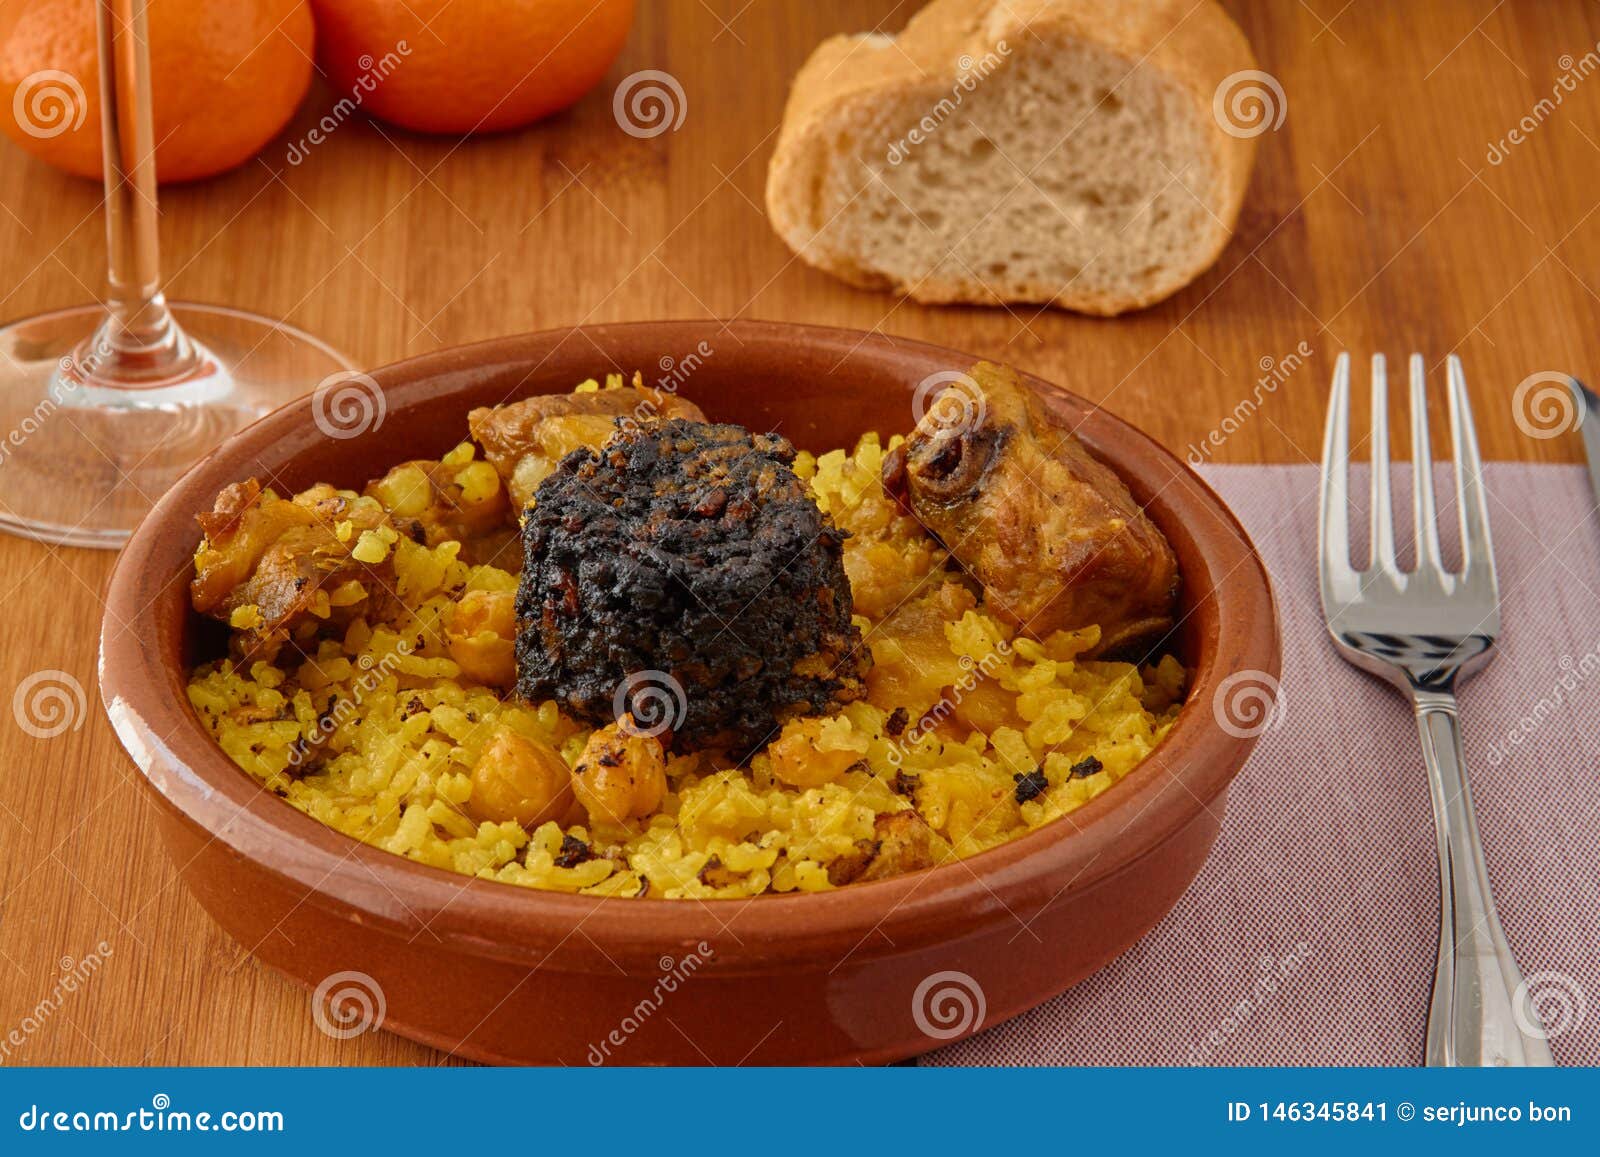 baked rice in a pottery dish accompanied by pork, chickpeas, blood sausage, tomato and garlic. traditional